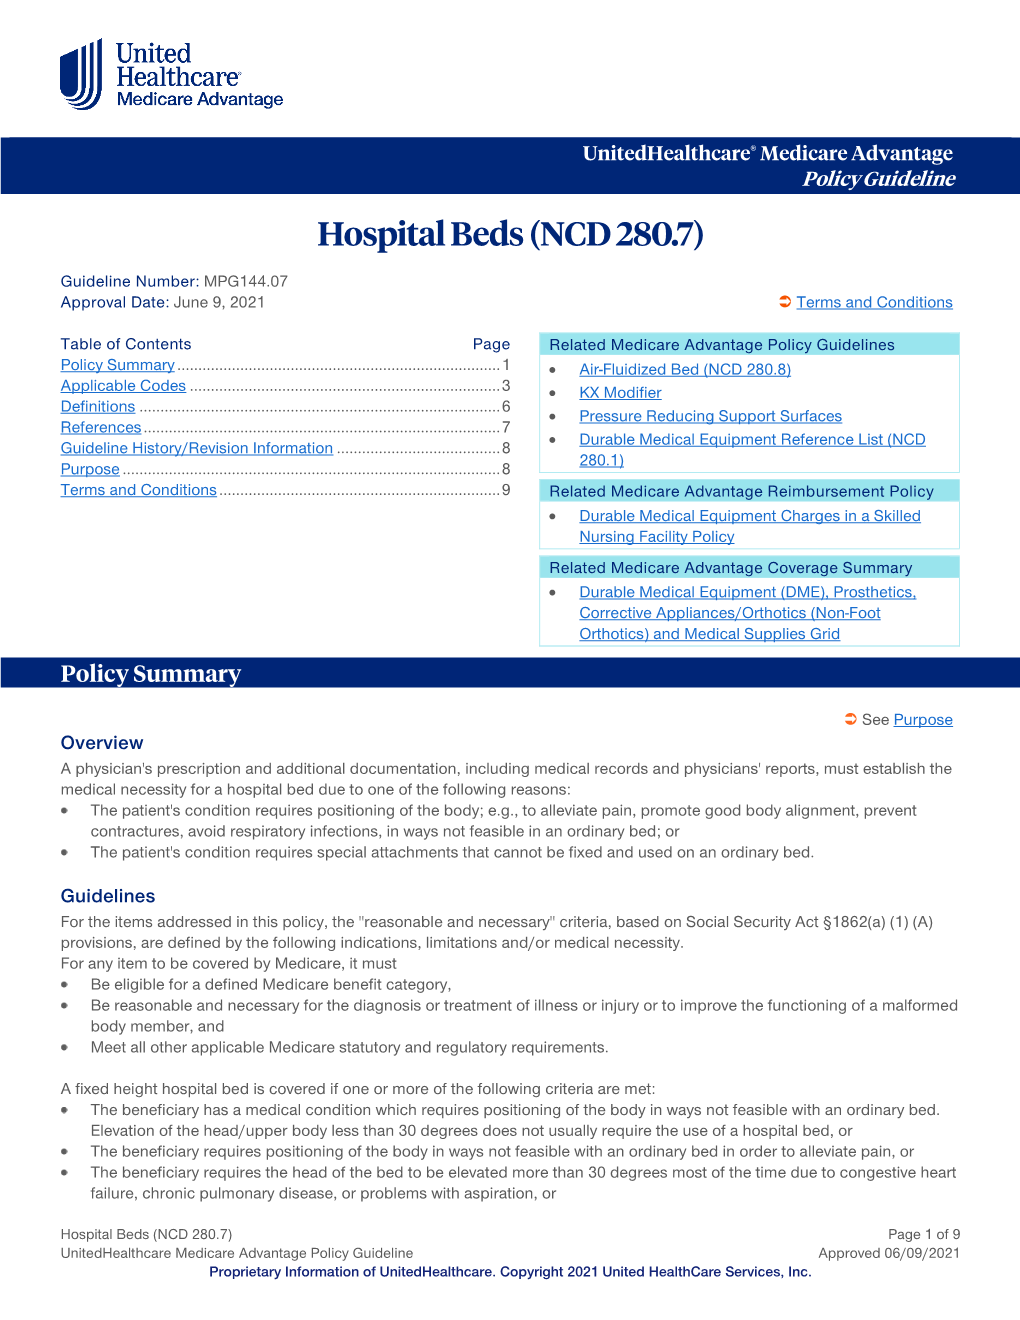 Hospital Beds (NCD 280.7) – Medicare Advantage Policy Guideline